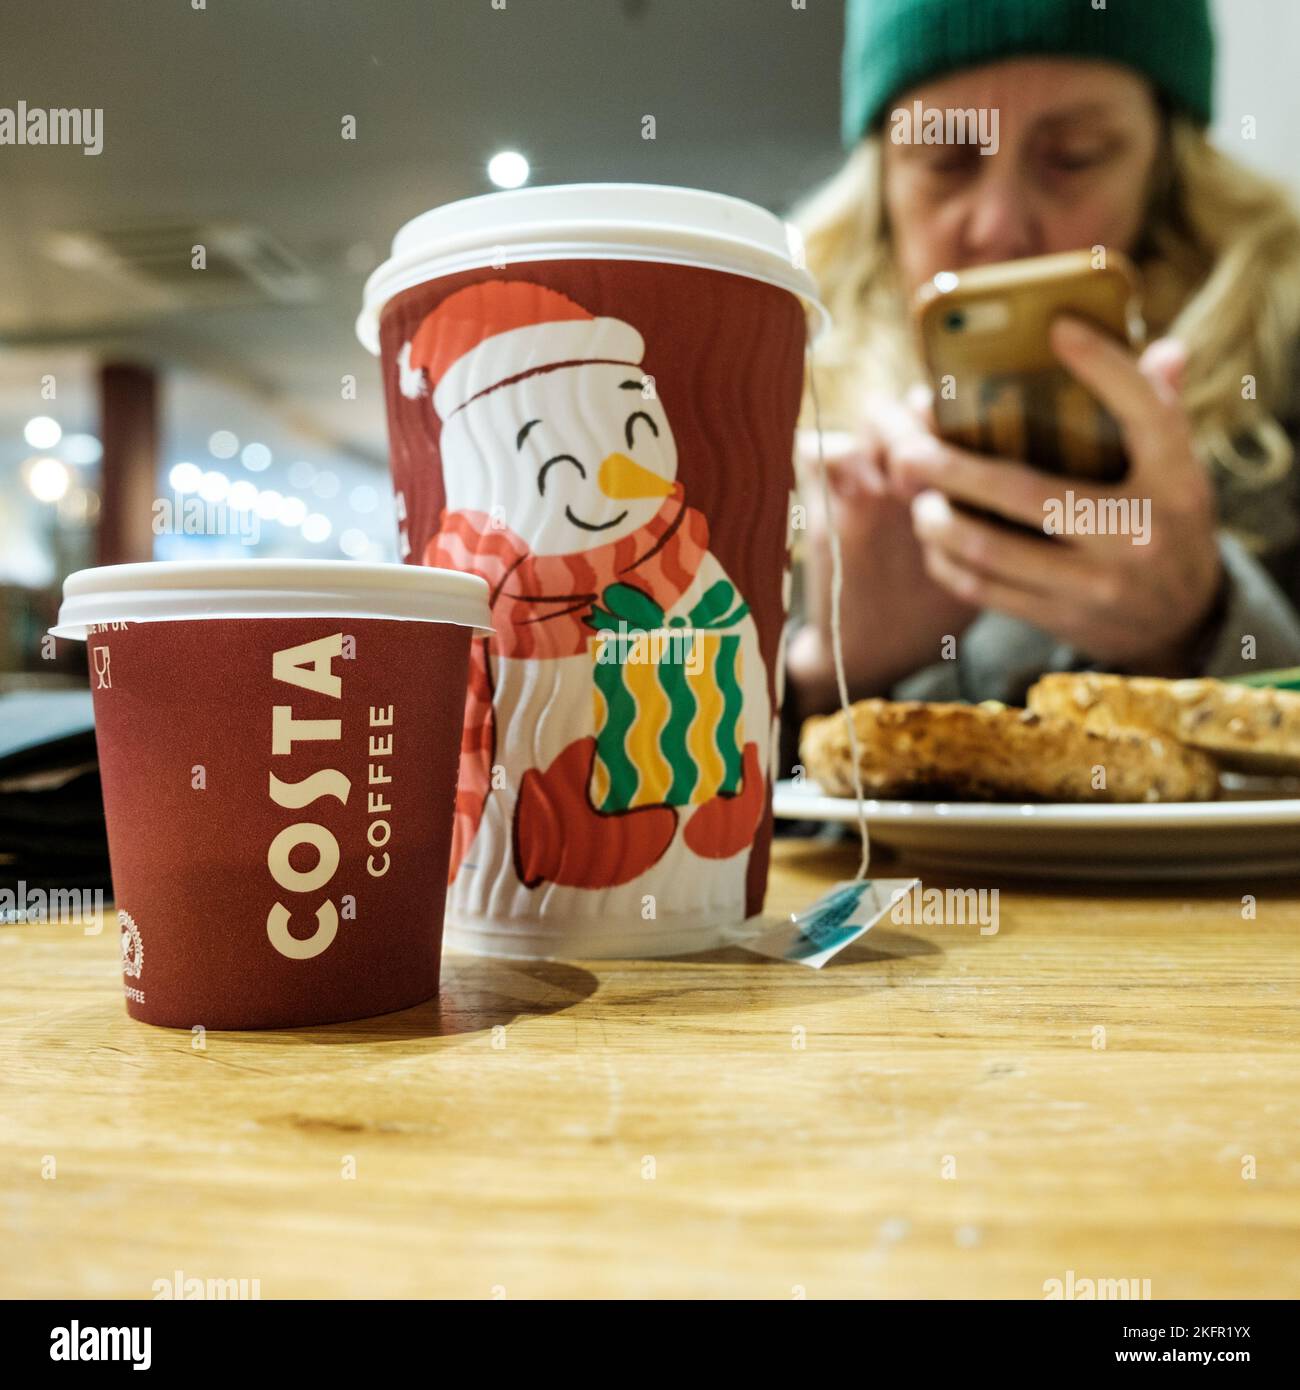 Epsom, Surrey, London UK, November 19 2022, Woman Sitting Alone in A Costa Coffee Shop Using A Mobile Or Smartphone Stock Photo